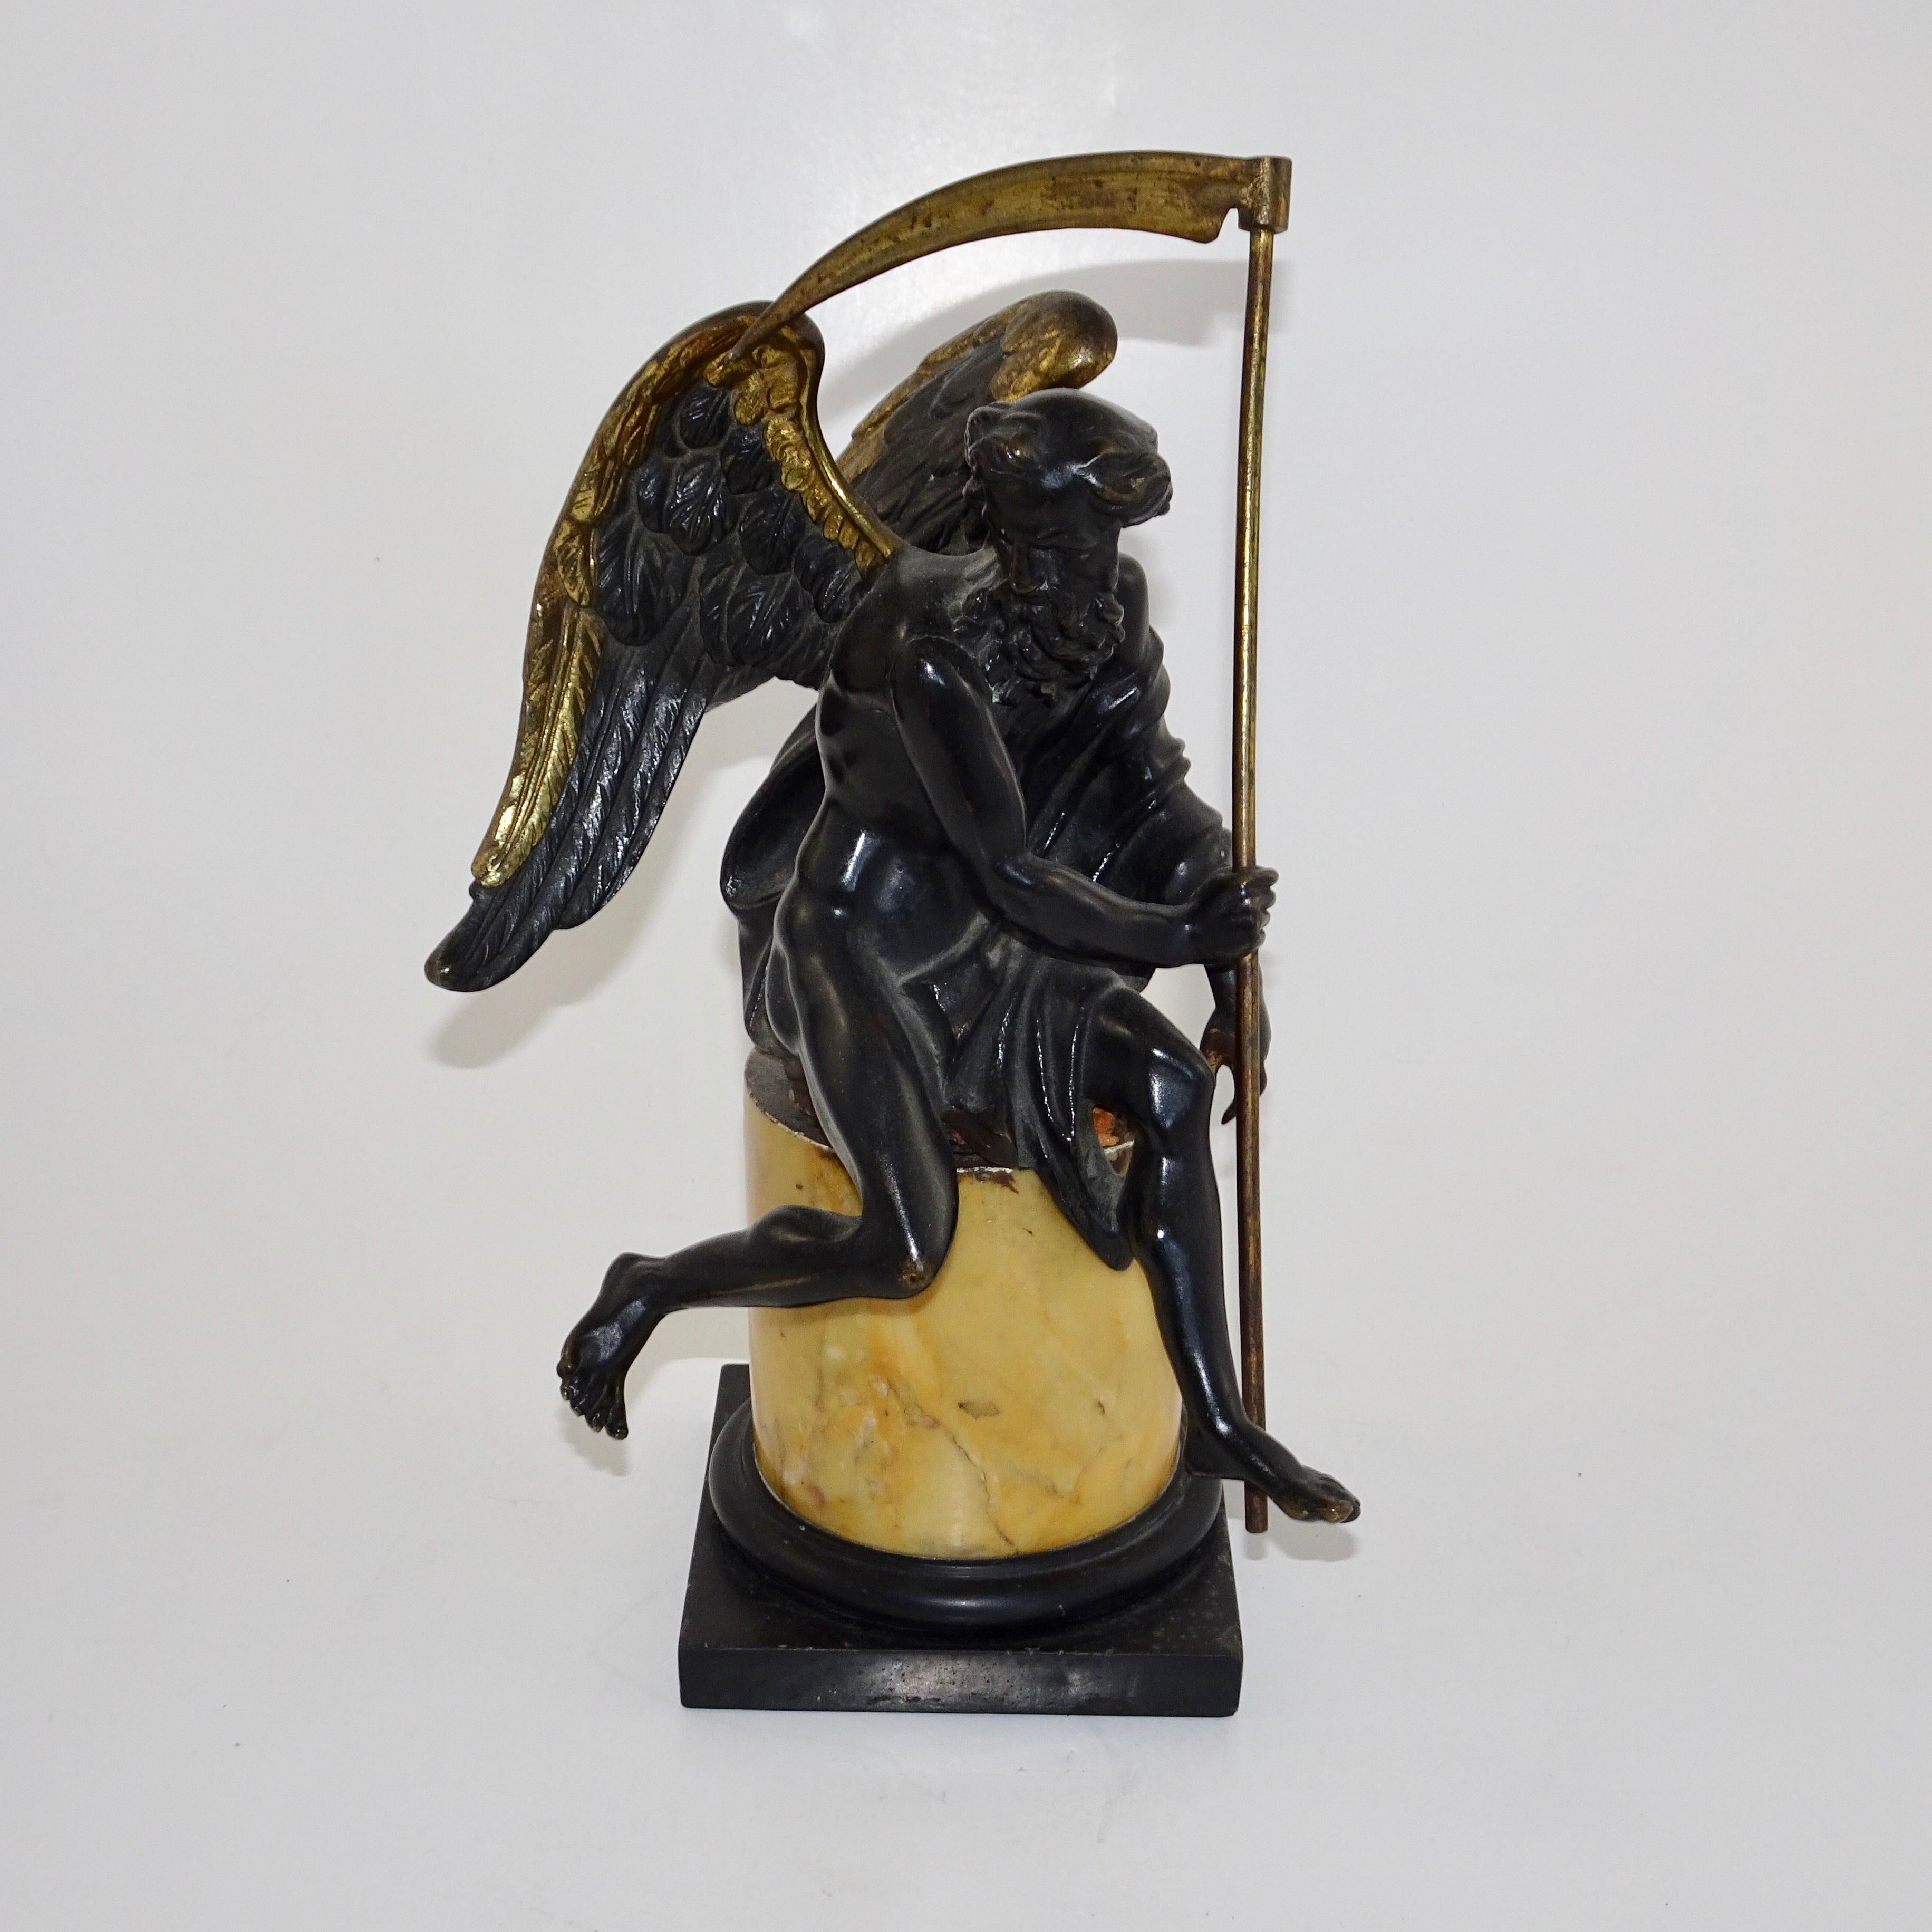 This statuette depicts the biblical angel from Revelations 14 in which the Bible says 